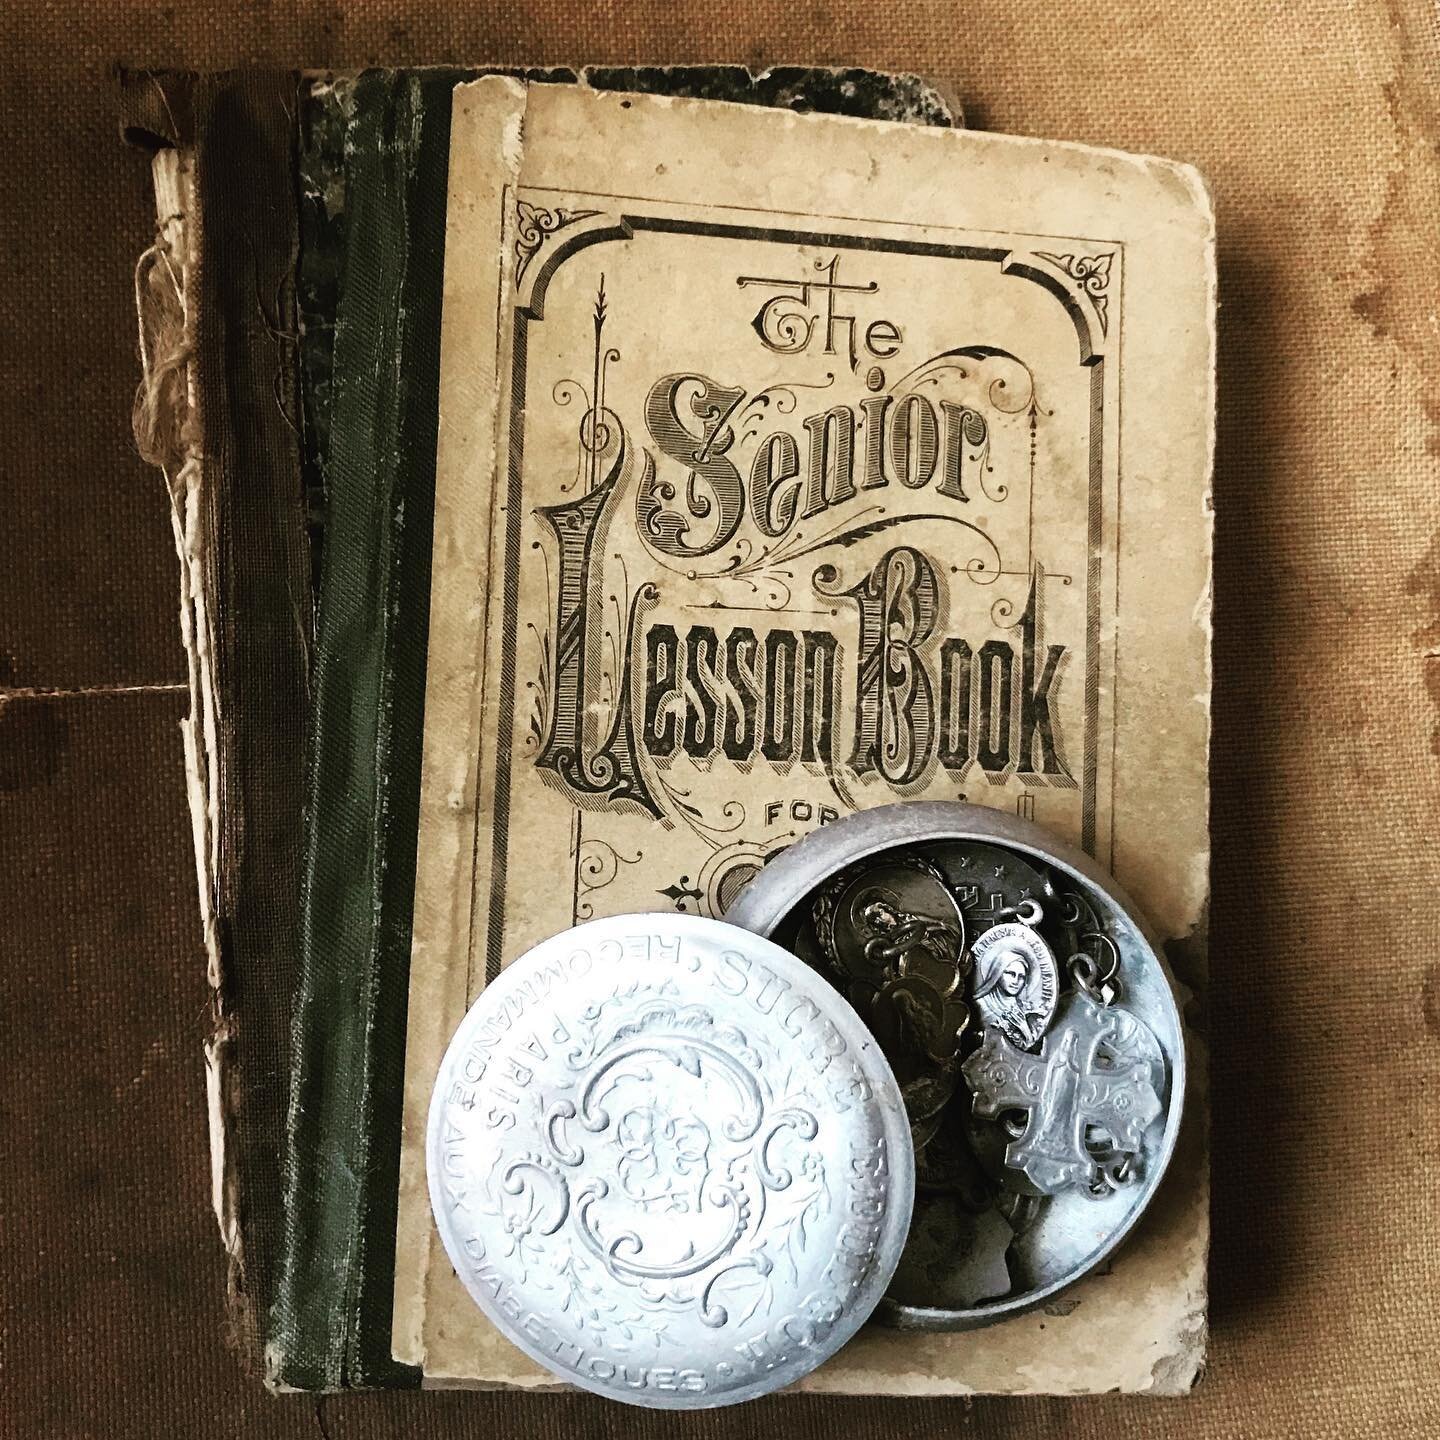 Favorite things&hellip;.
#vintage #french #religious #medal #oldbooks #eclectic #eclecticvintage #antique #fleamarketfinds #collections #gathering #flatlaygathering #flatlay #cottage #romantic #moody #cottagefarmhousestyle #cottagestyle #farmhousedec